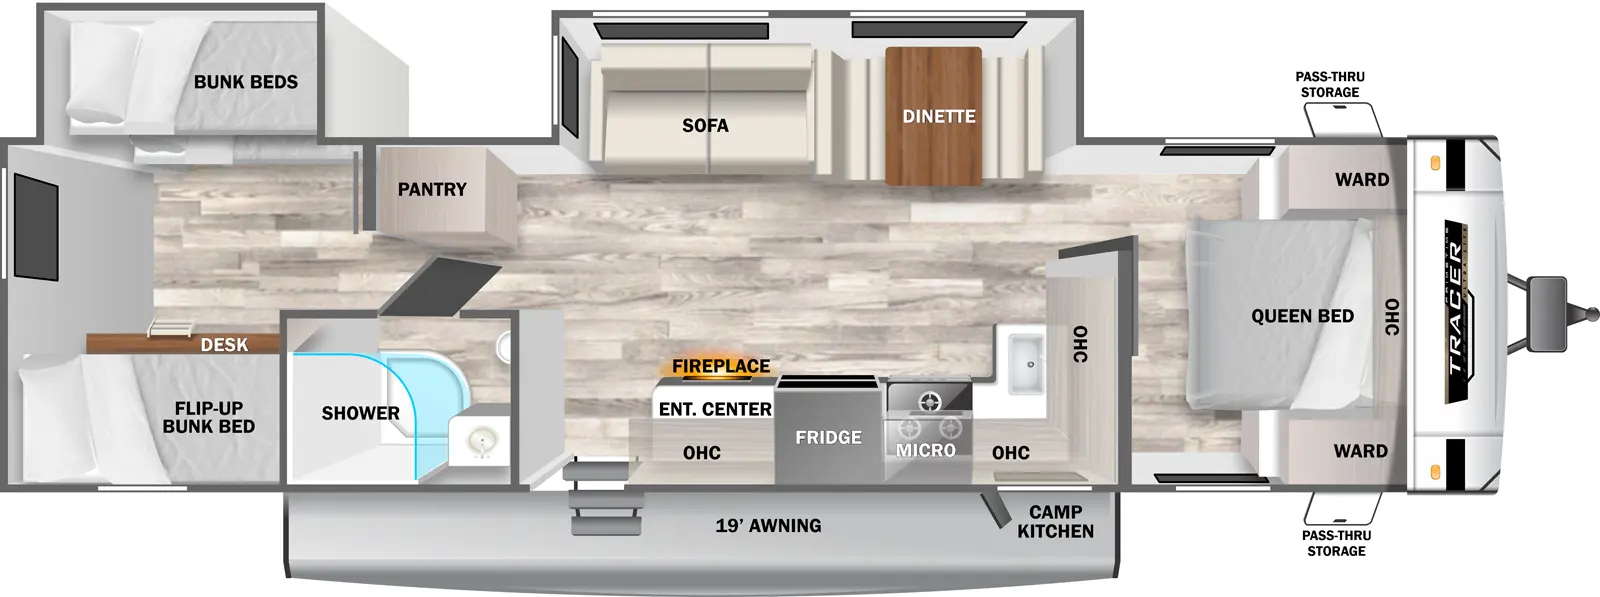 The 32DSB has 2 slideouts on the off-door side and 1 entry door. Exterior features include a 19 ft. awning, camp ktichen, and front pass-through storage. Interior layout from front to back includes: front bedroom with foot-facing Queen bed, opposing side wardrobes and overhead cabinet; off-door side slideout holding a sofa and dinette; door side kitchen with overhead cabinets, entertainment center with fireplace, refrigerator, overhead microwave, stovetop and sink; door side bathroom with shower, toilet and vanity; pantry across from bathroom; and rear bunkhouse with door side flip-up bunk with desk below and off-door side slide out holding bunk beds.